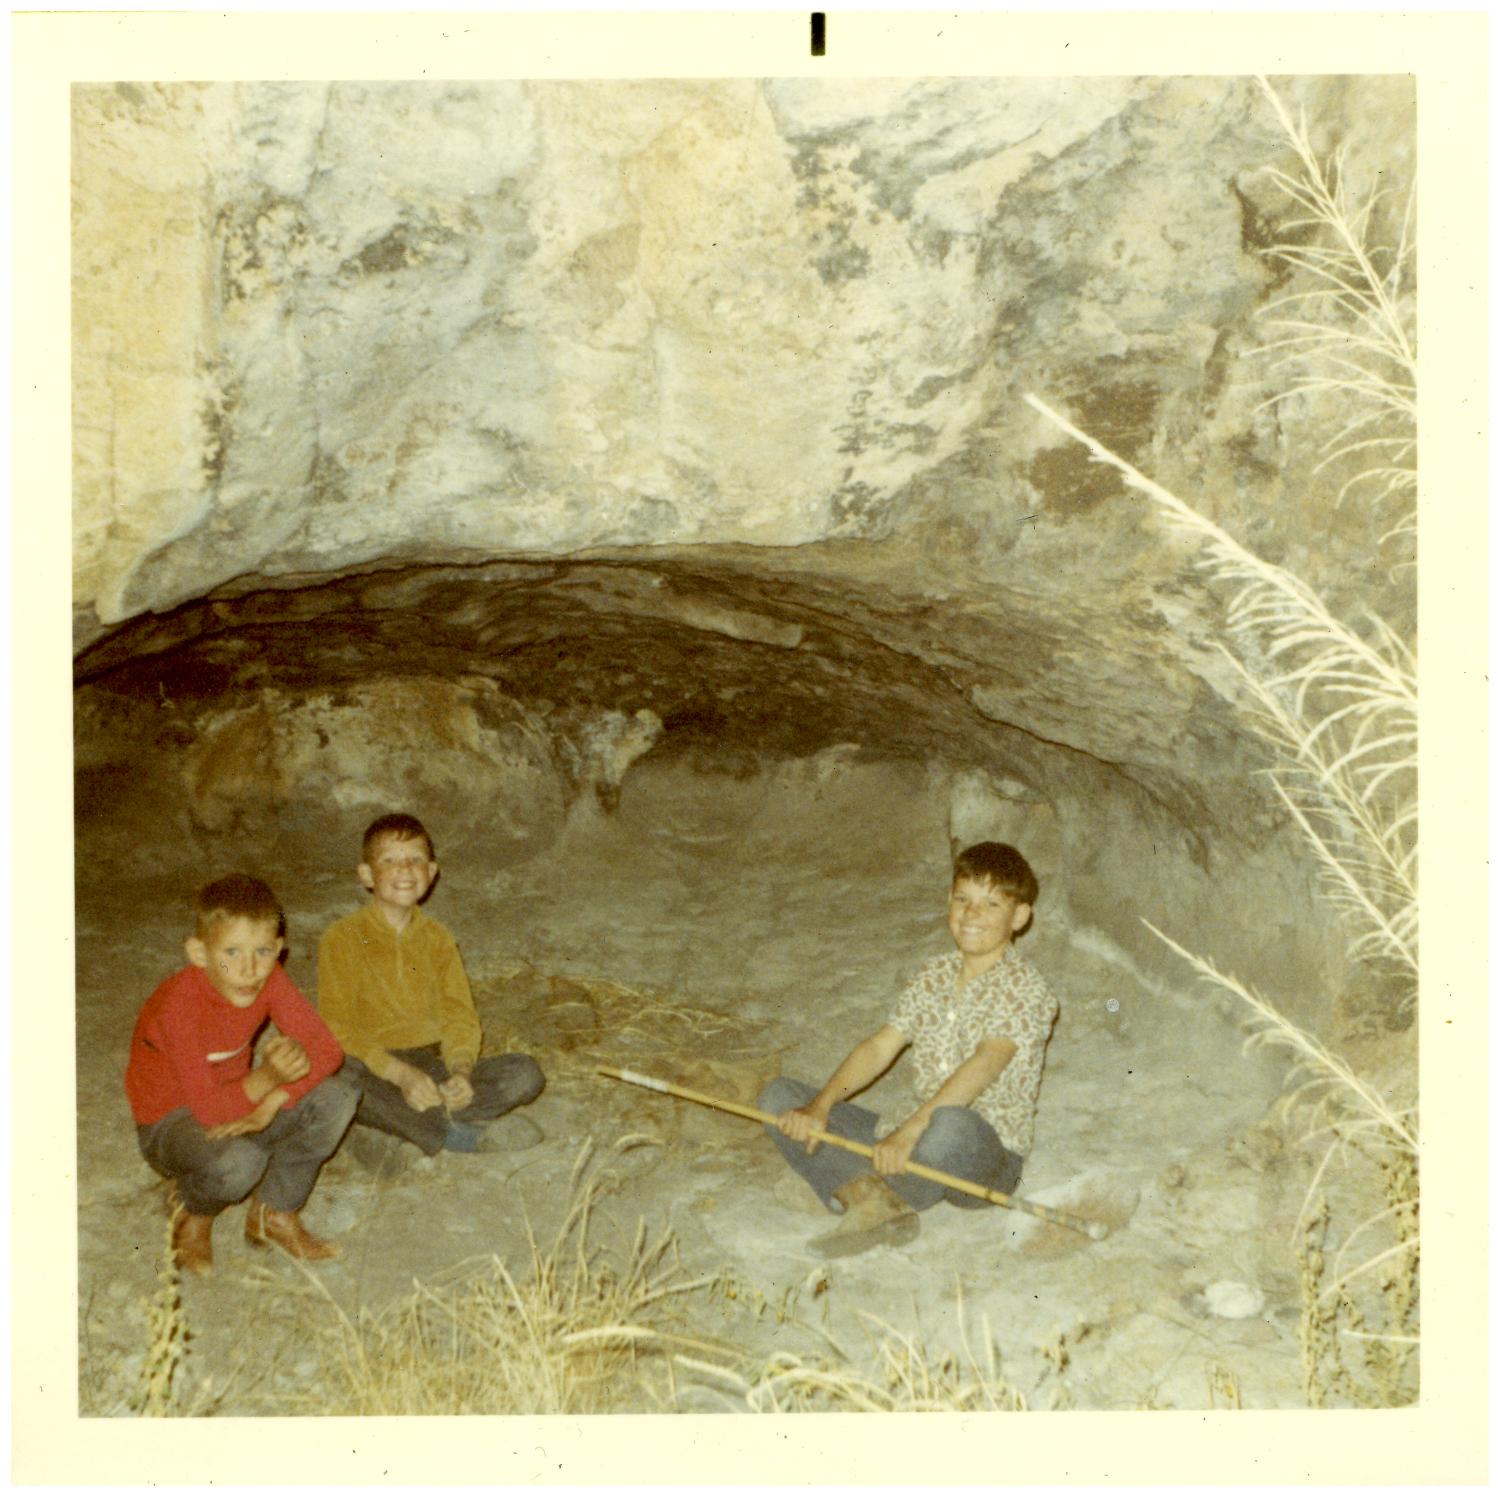 3 boys in cave